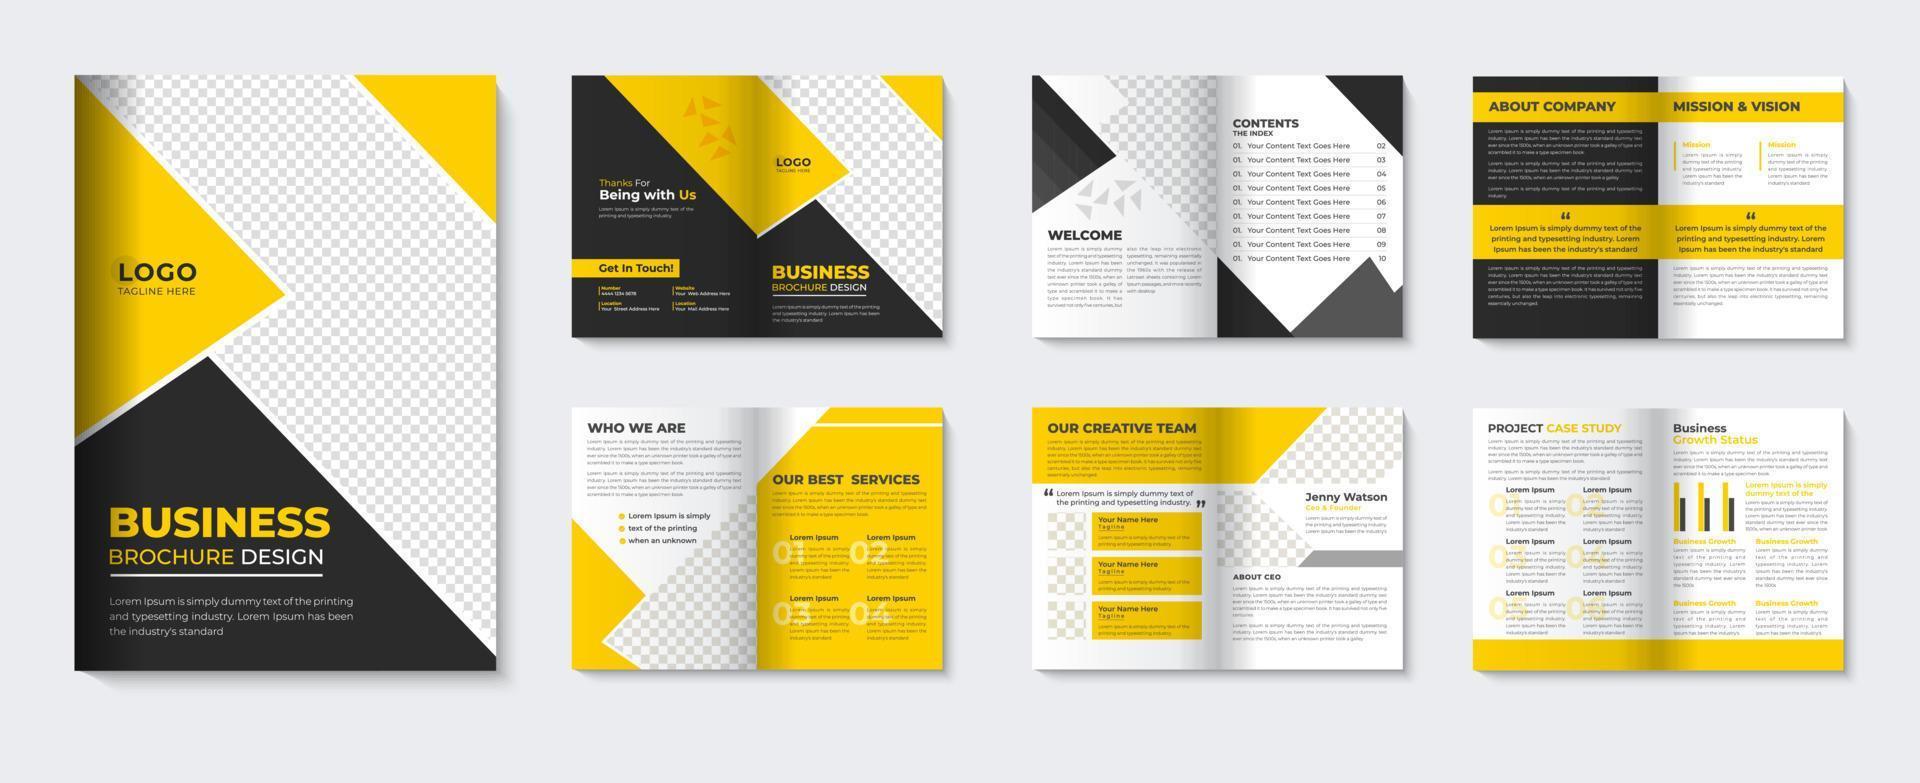 Corporate brochure template and minimalist leaflet company profile yellow cover page design vector